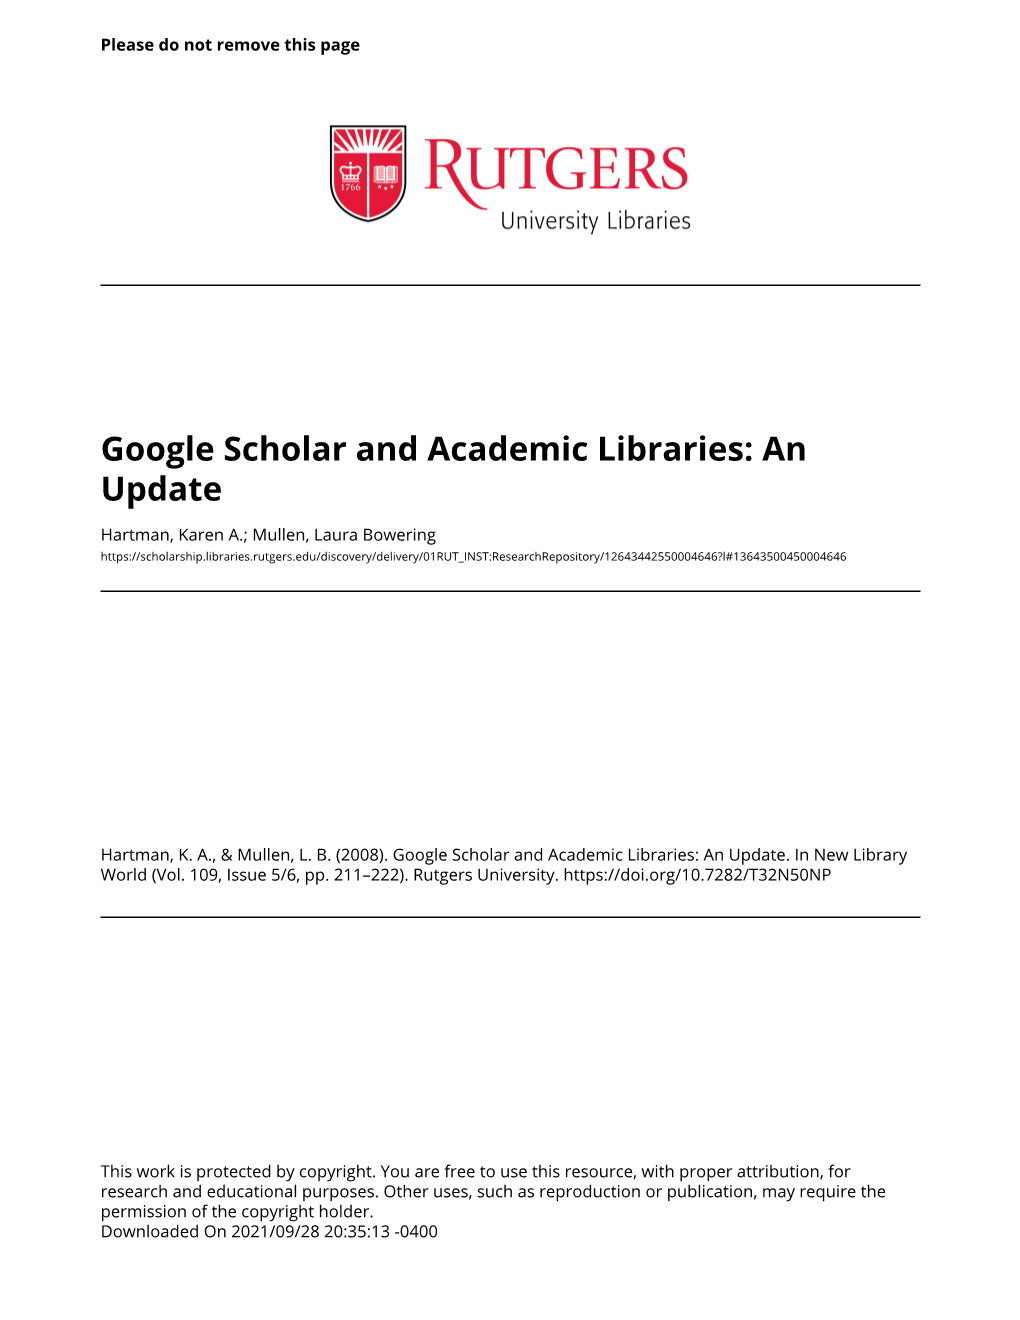 Google Scholar and Academic Libraries: an Update